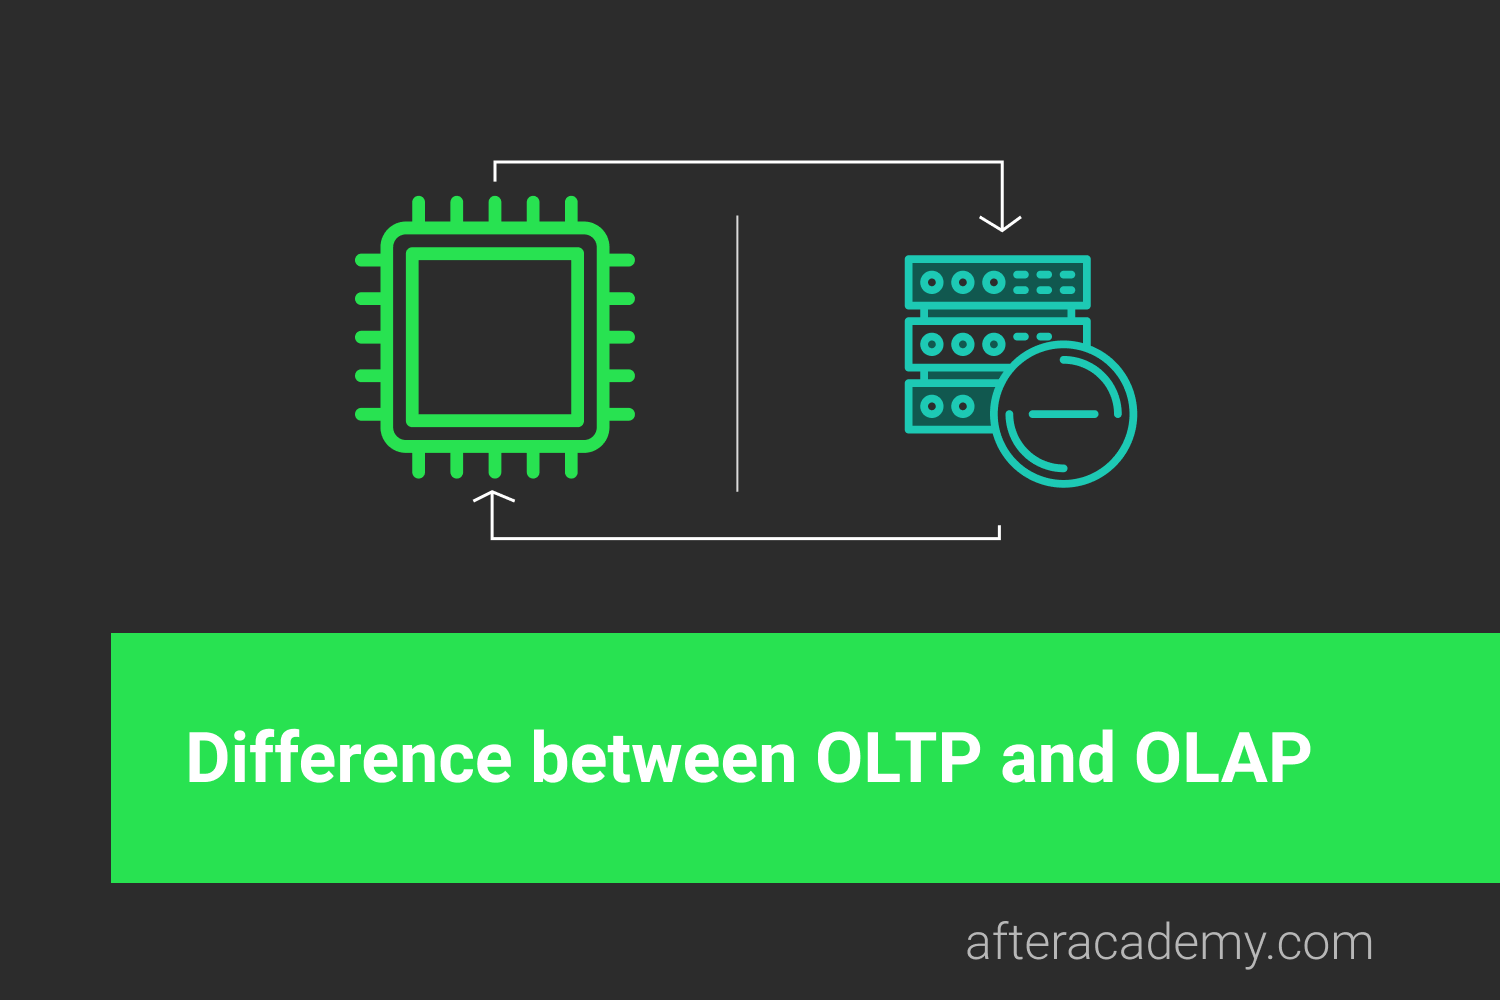 What is the difference between OLTP and OLAP?